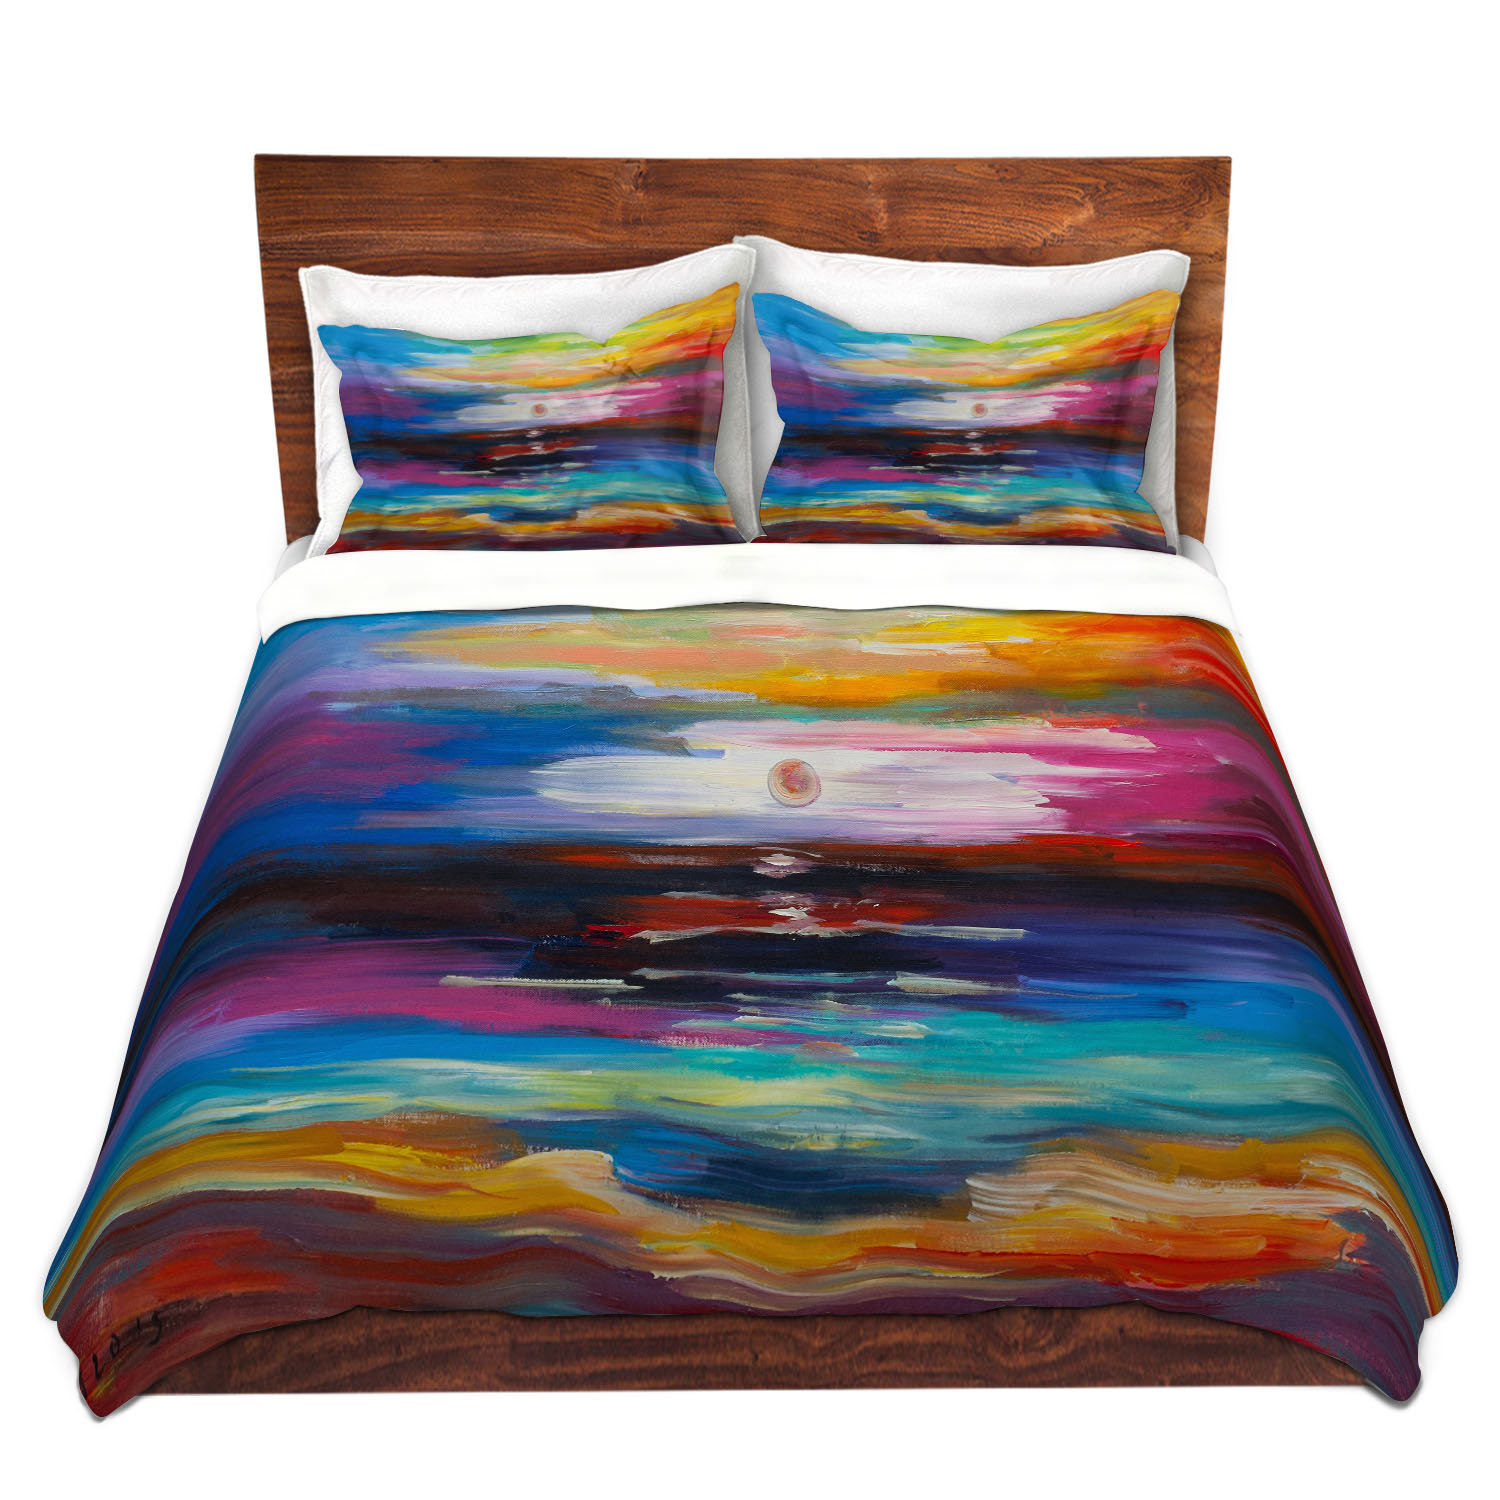 Rainbow Colors Twin Size Decorative 2 Piece Bedding Set with 1 Pillow Sham Abstract Nature Fantasy Spring Floral Rainbow Stars Flowers Cheerful Fun Design Ambesonne Abstract Duvet Cover Set 